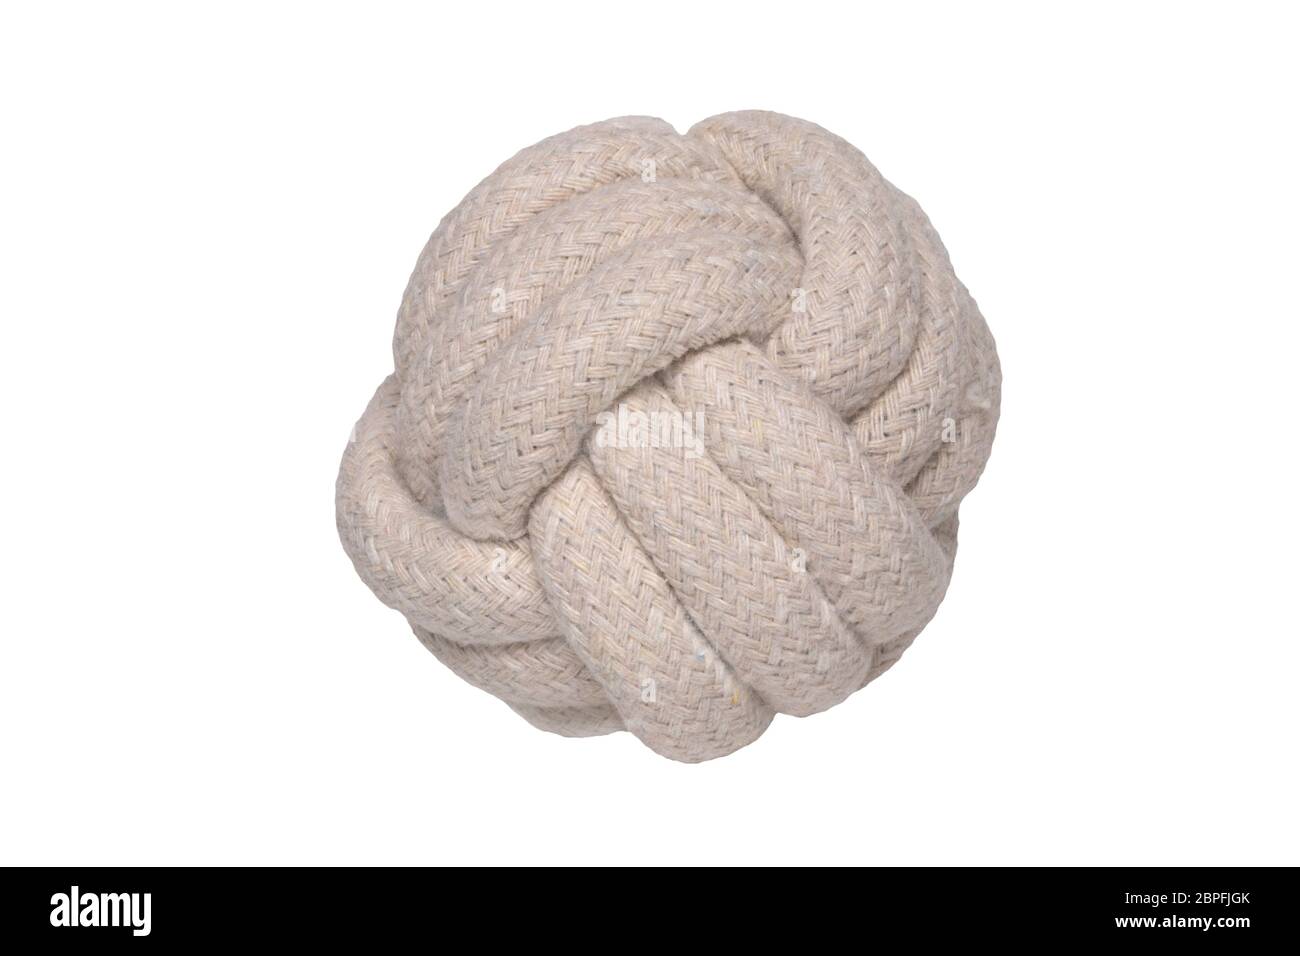 Rope isolated. Close-up of a rope knote ball. Macro. Knoted rope dog toy. Stock Photo